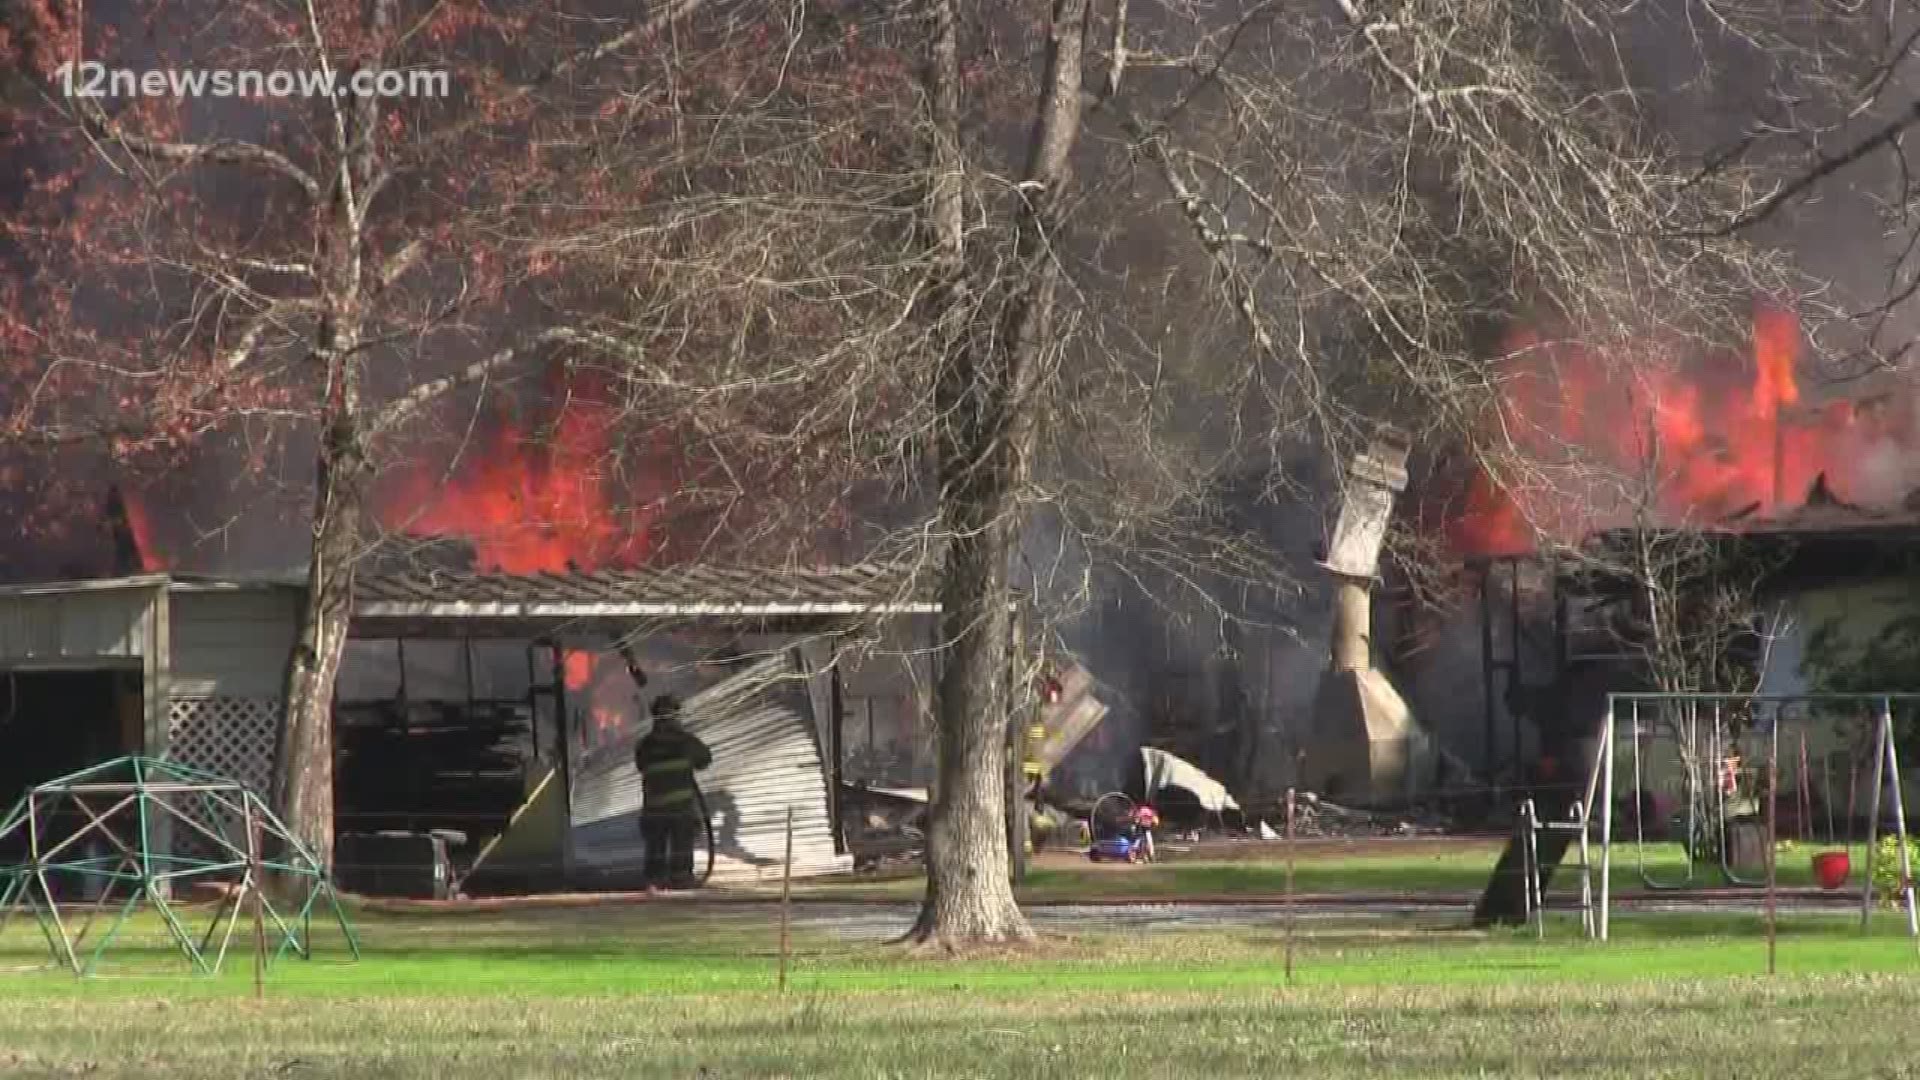 Orange County firefighters responded to a house fire in Pine Forest, just north of Vidor, earlier in the afternoon on Friday. The house appears to be a total loss.